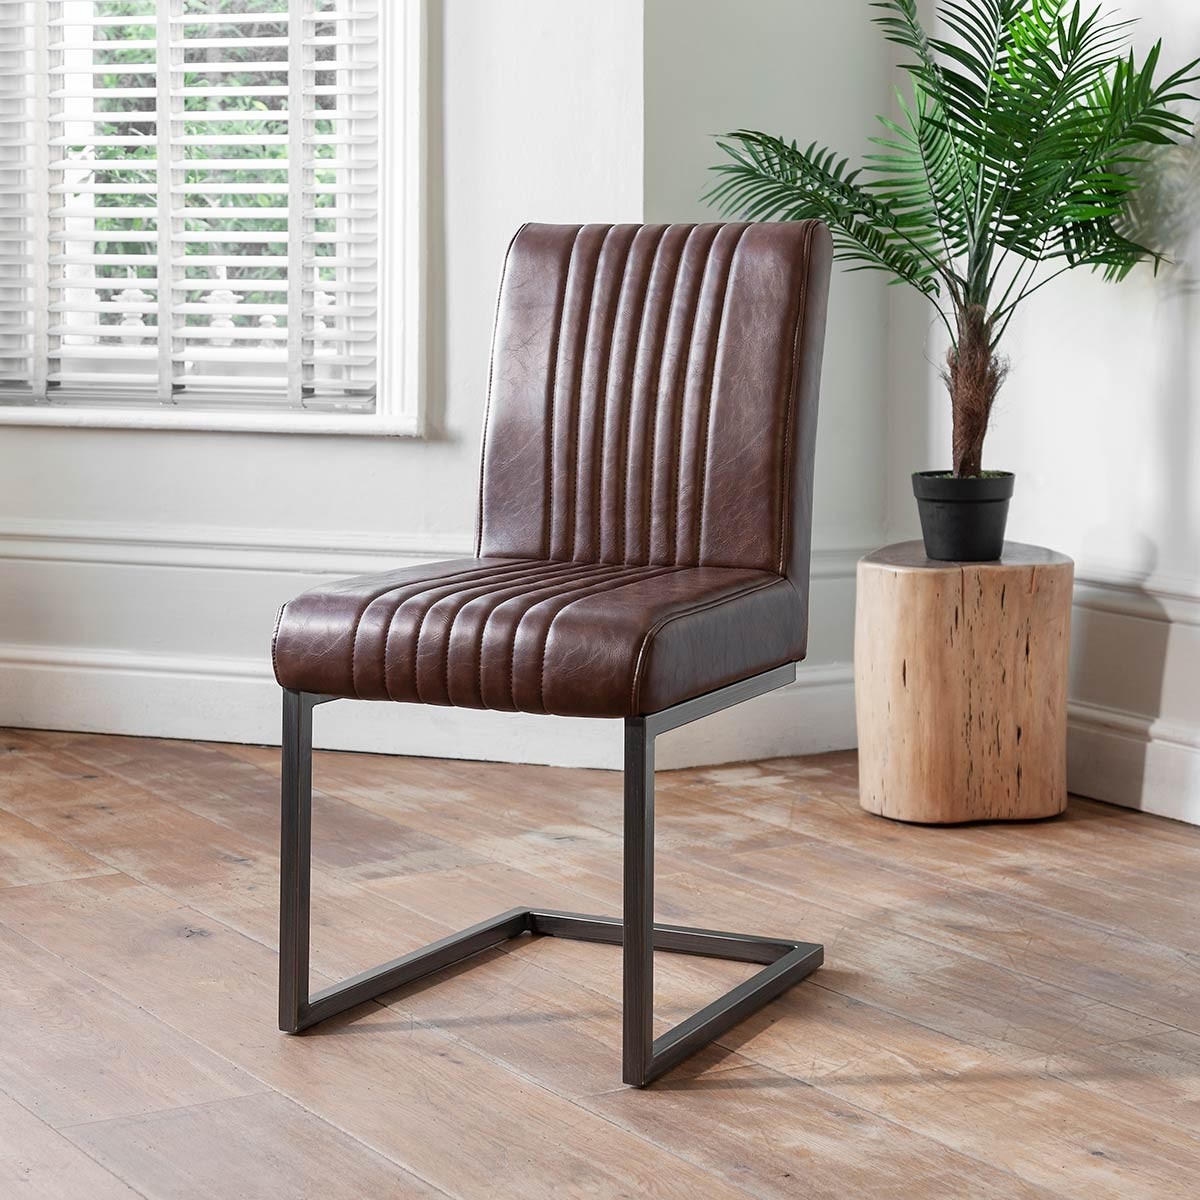 Industrial Aged Leather Cantilever, Rustic Brown Leather Dining Chairs